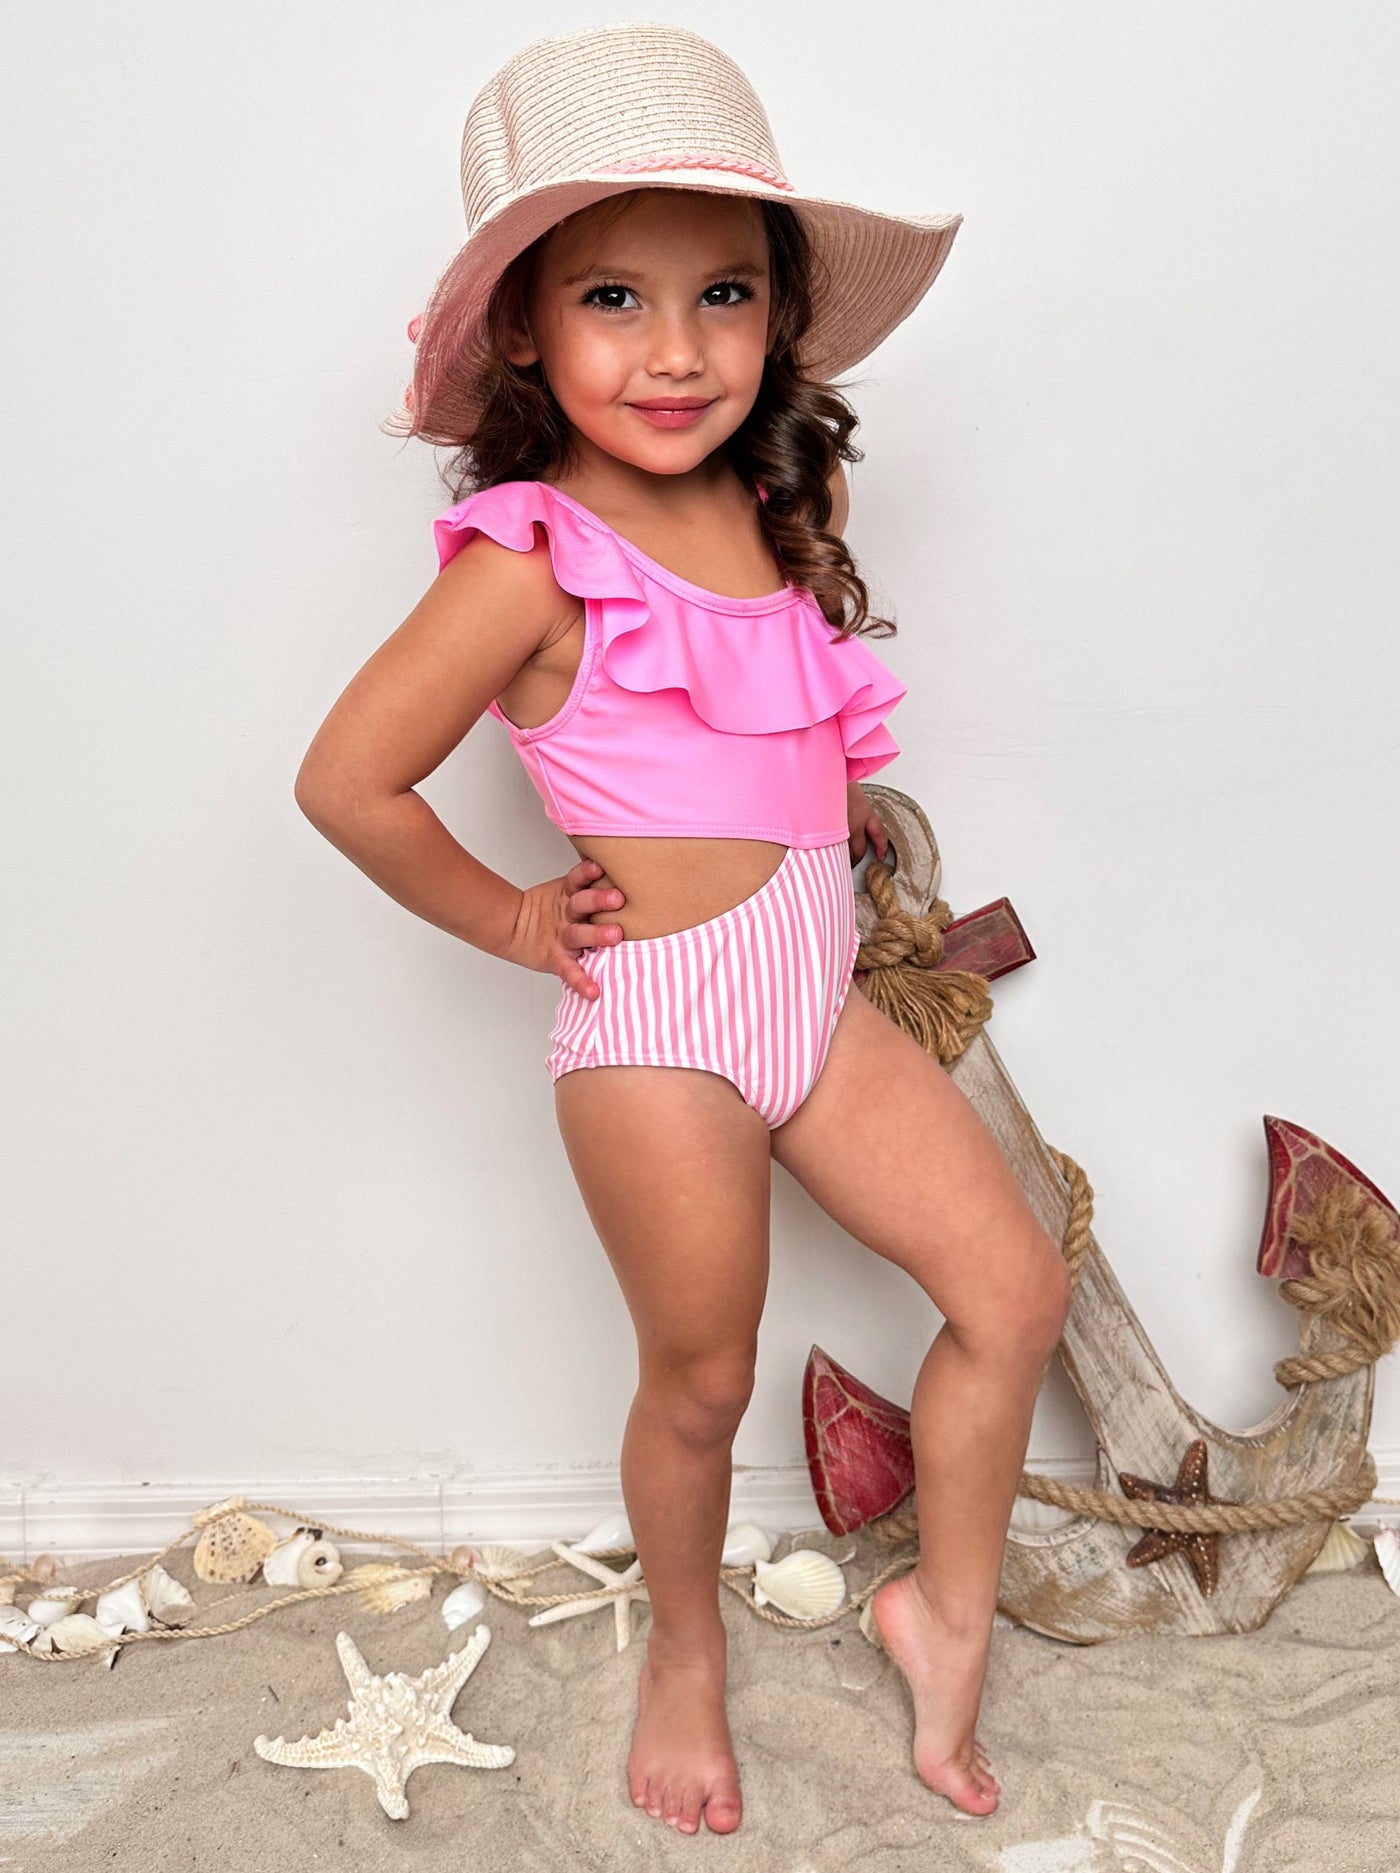 Mia Belle Girls Pink Cut-Out Swimsuit | Cute Toddler Swimsuits